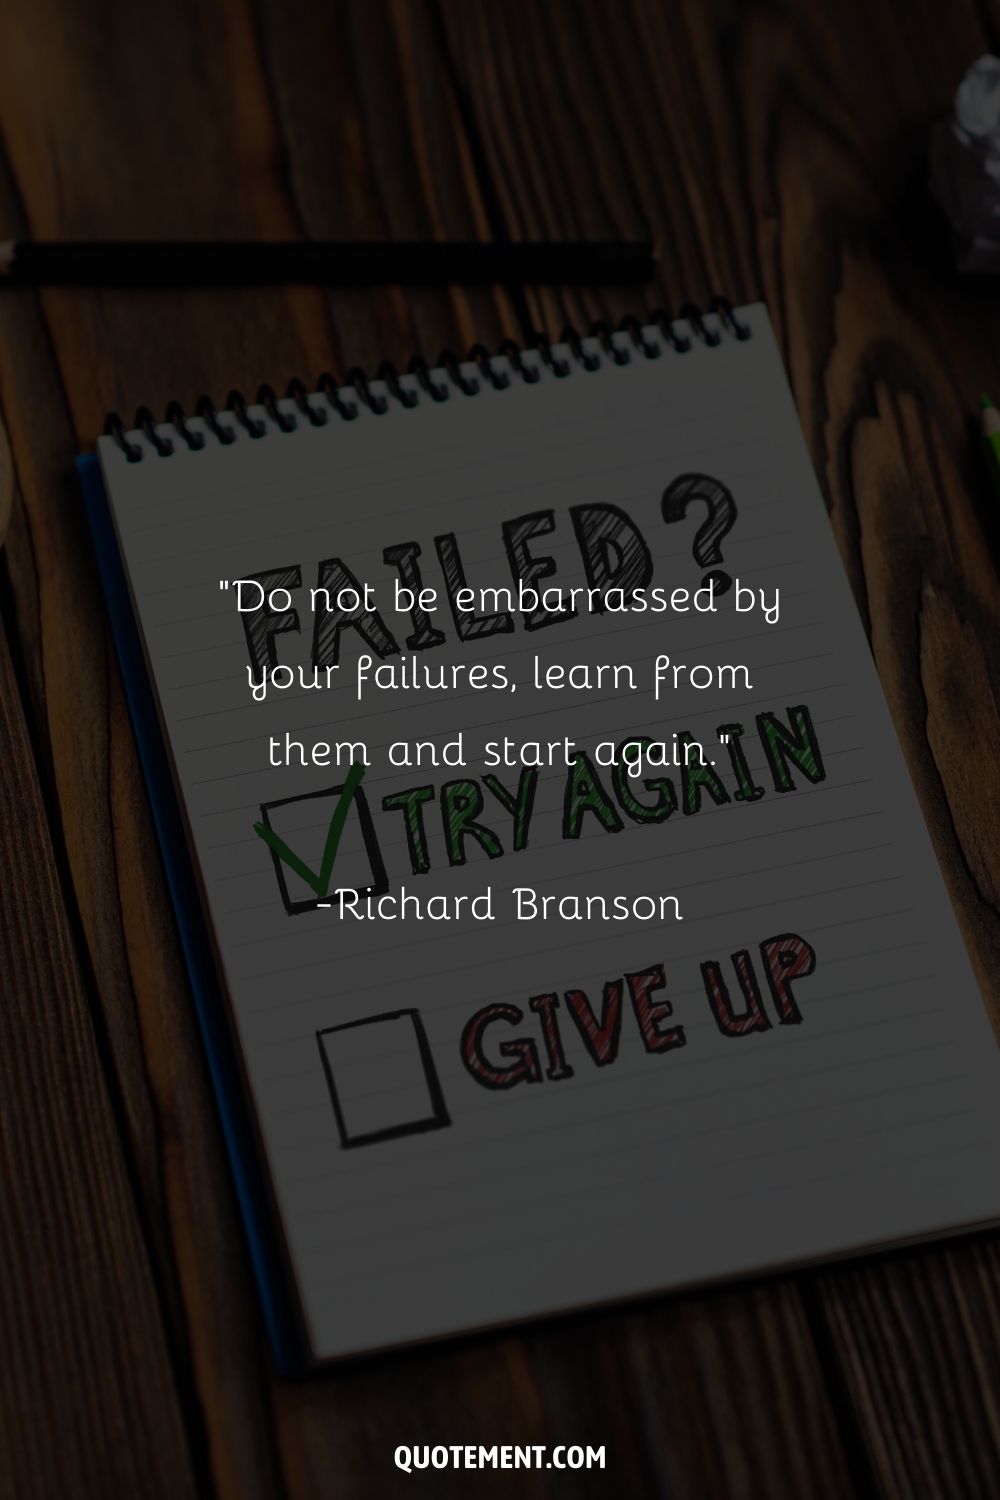 “Do not be embarrassed by your failures, learn from them and start again.” ― Richard Branson